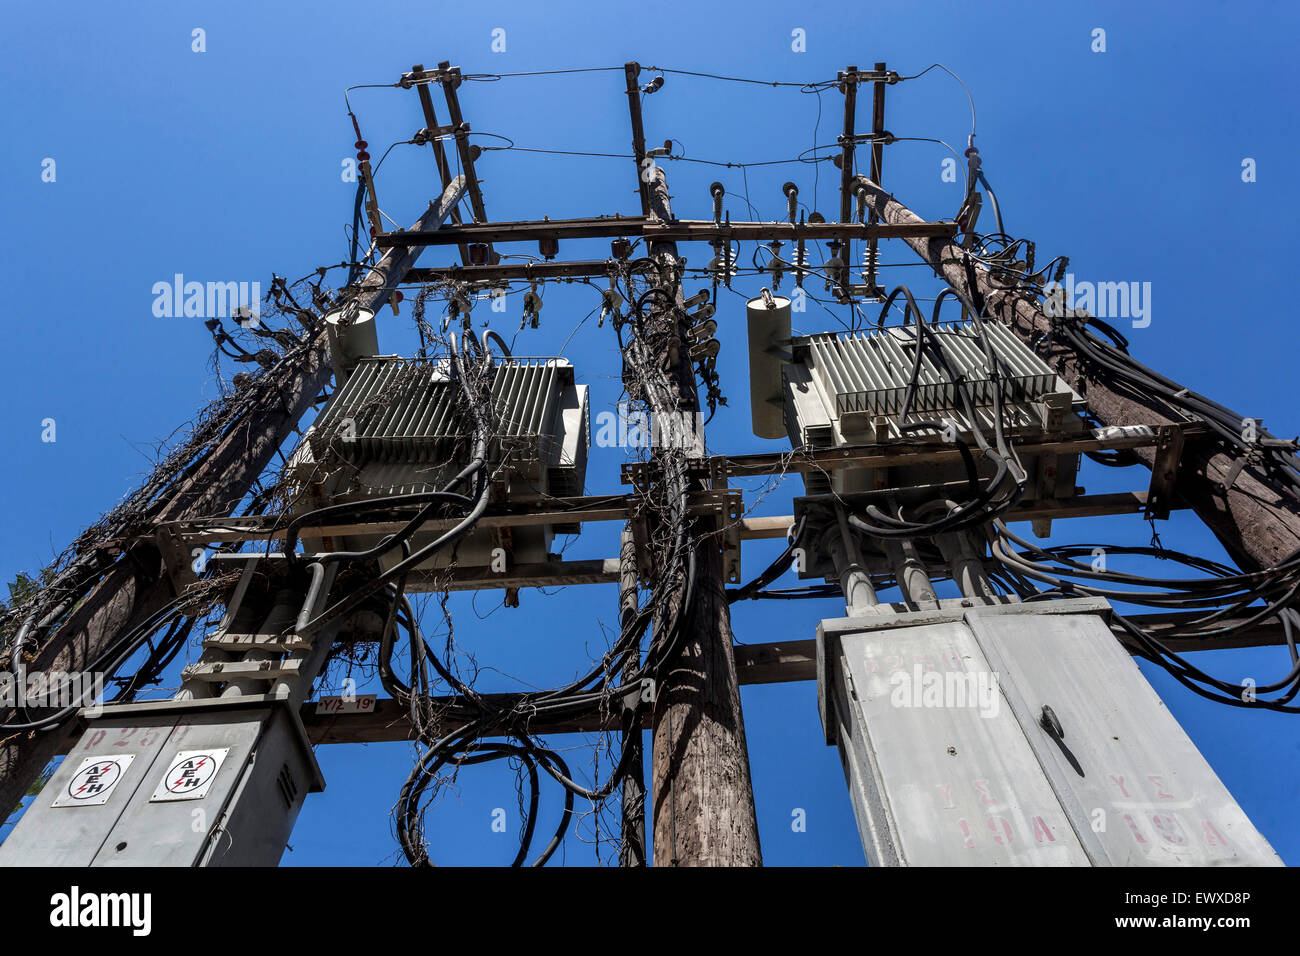 Power supply pylon with an Electric transformer Greece, Europe Wires in sky, mess Stock Photo